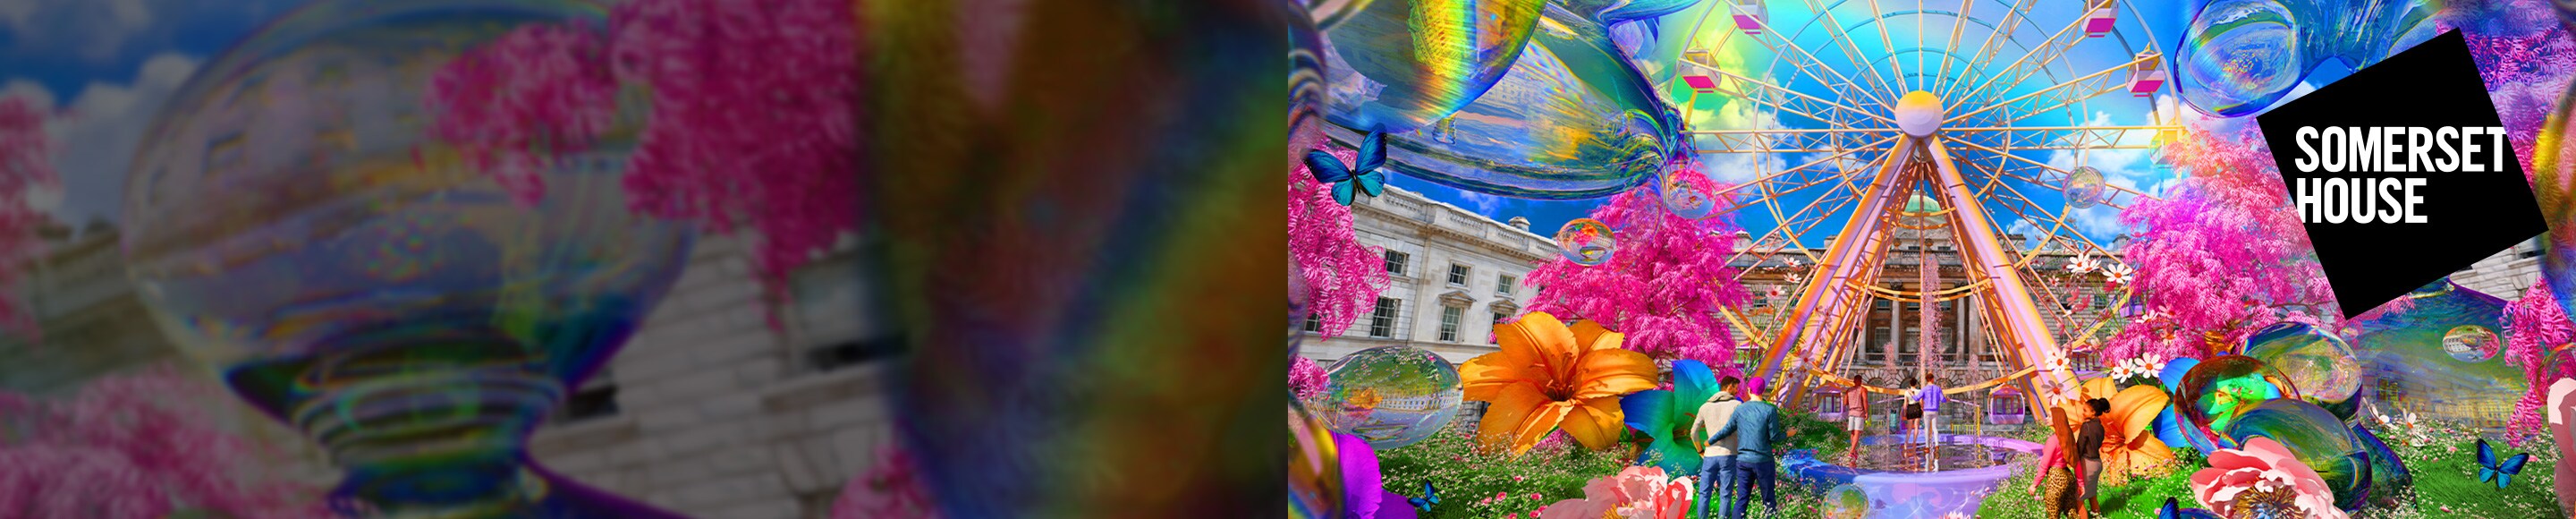 This Bright Land festival at Somerset House